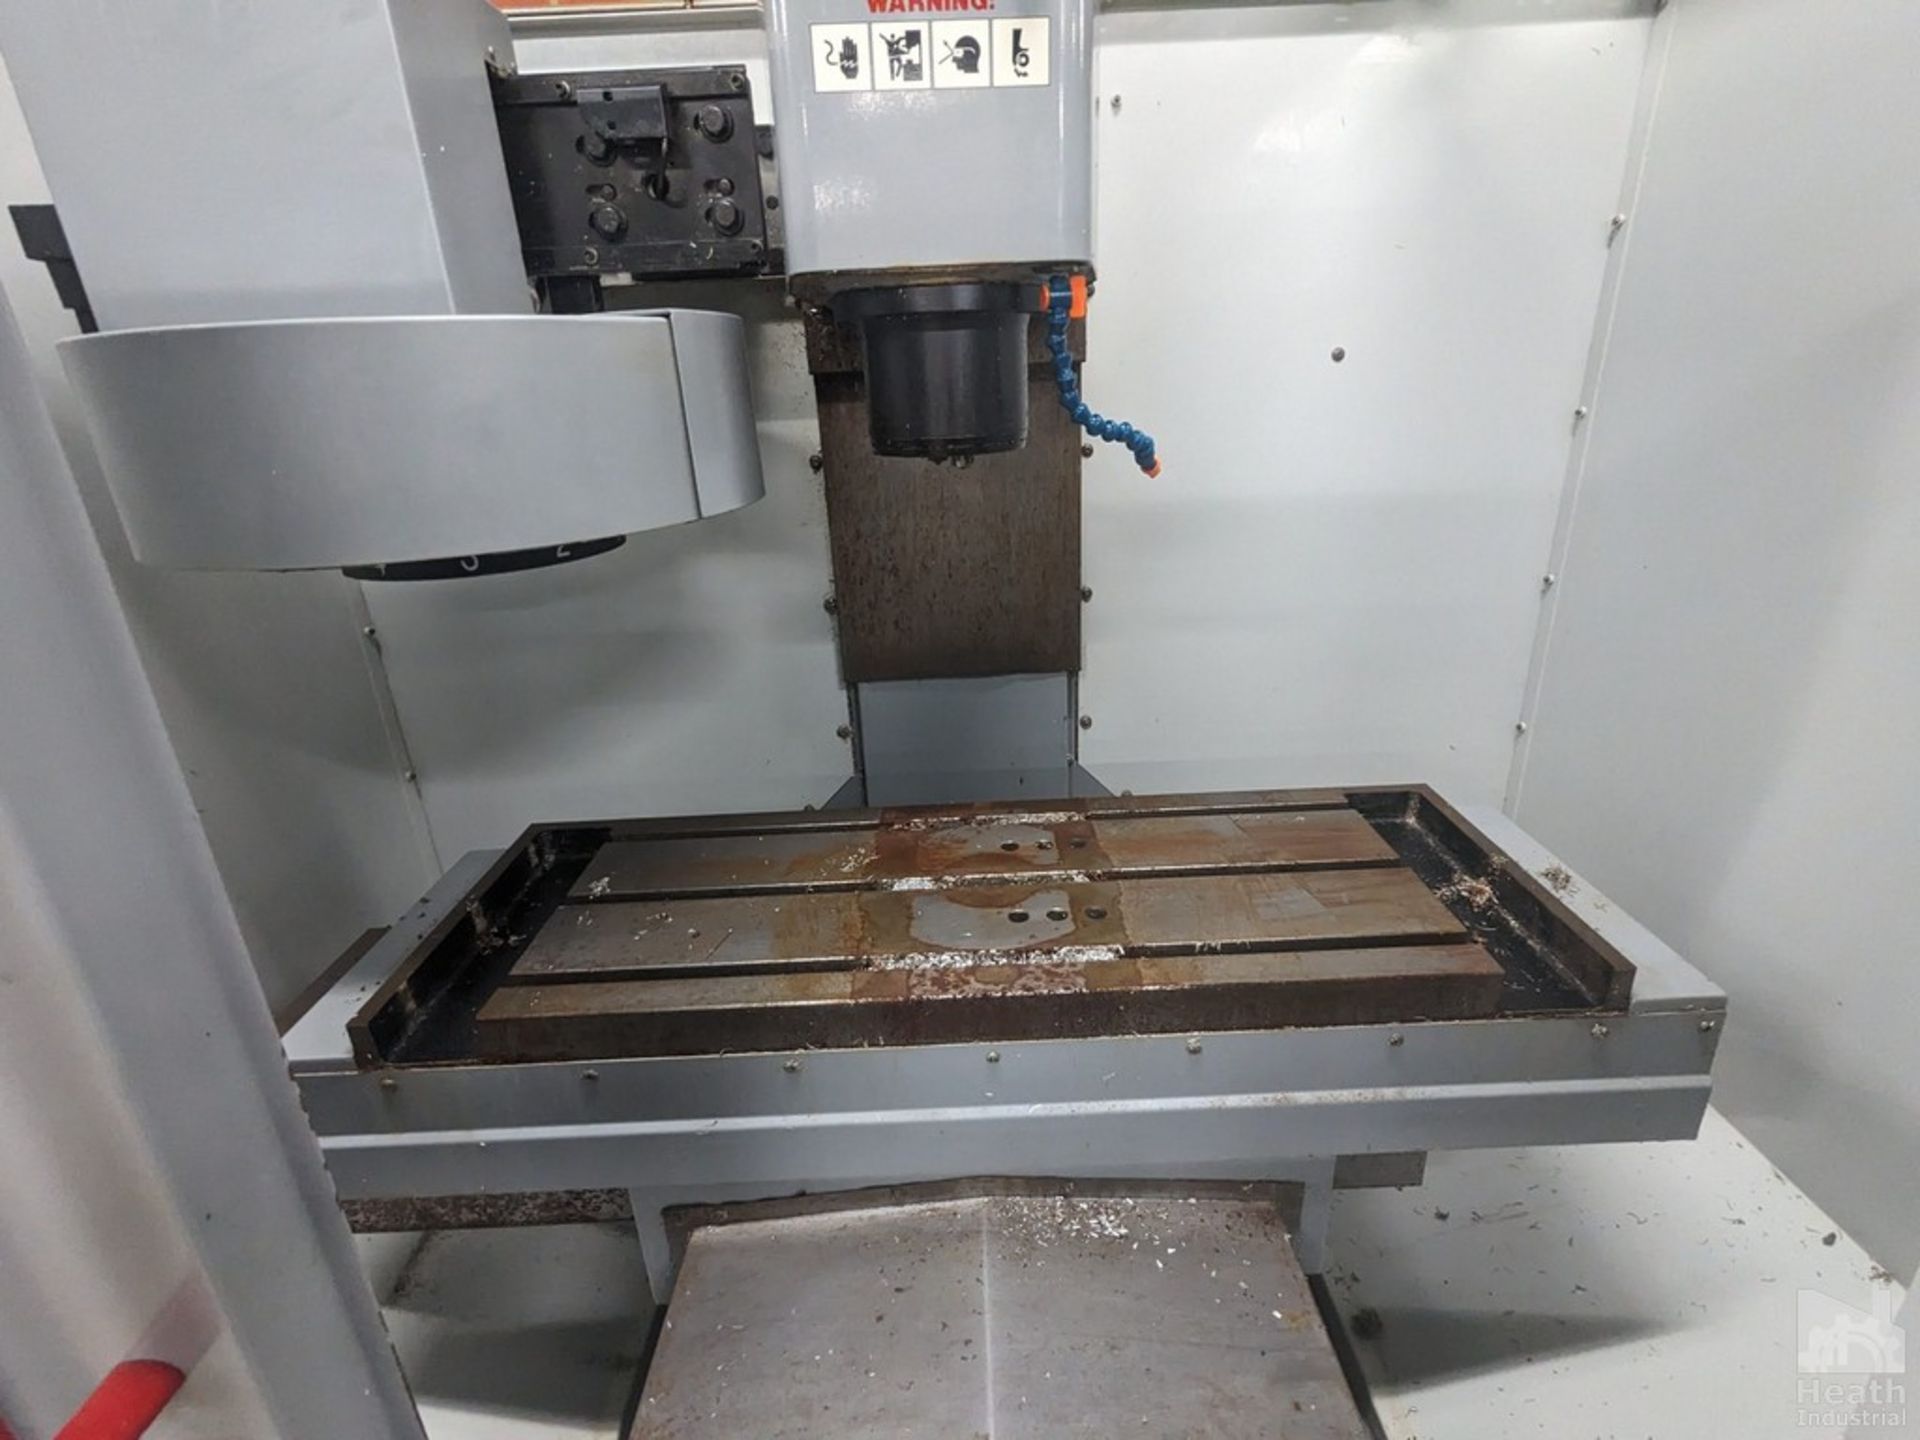 HAAS 3-AXIS MODEL MINI MILL CNC VERTICAL MACHINING CENTER, S/N 42775(NEW 2005) 12"X29" TABLE, 16" - Image 5 of 8